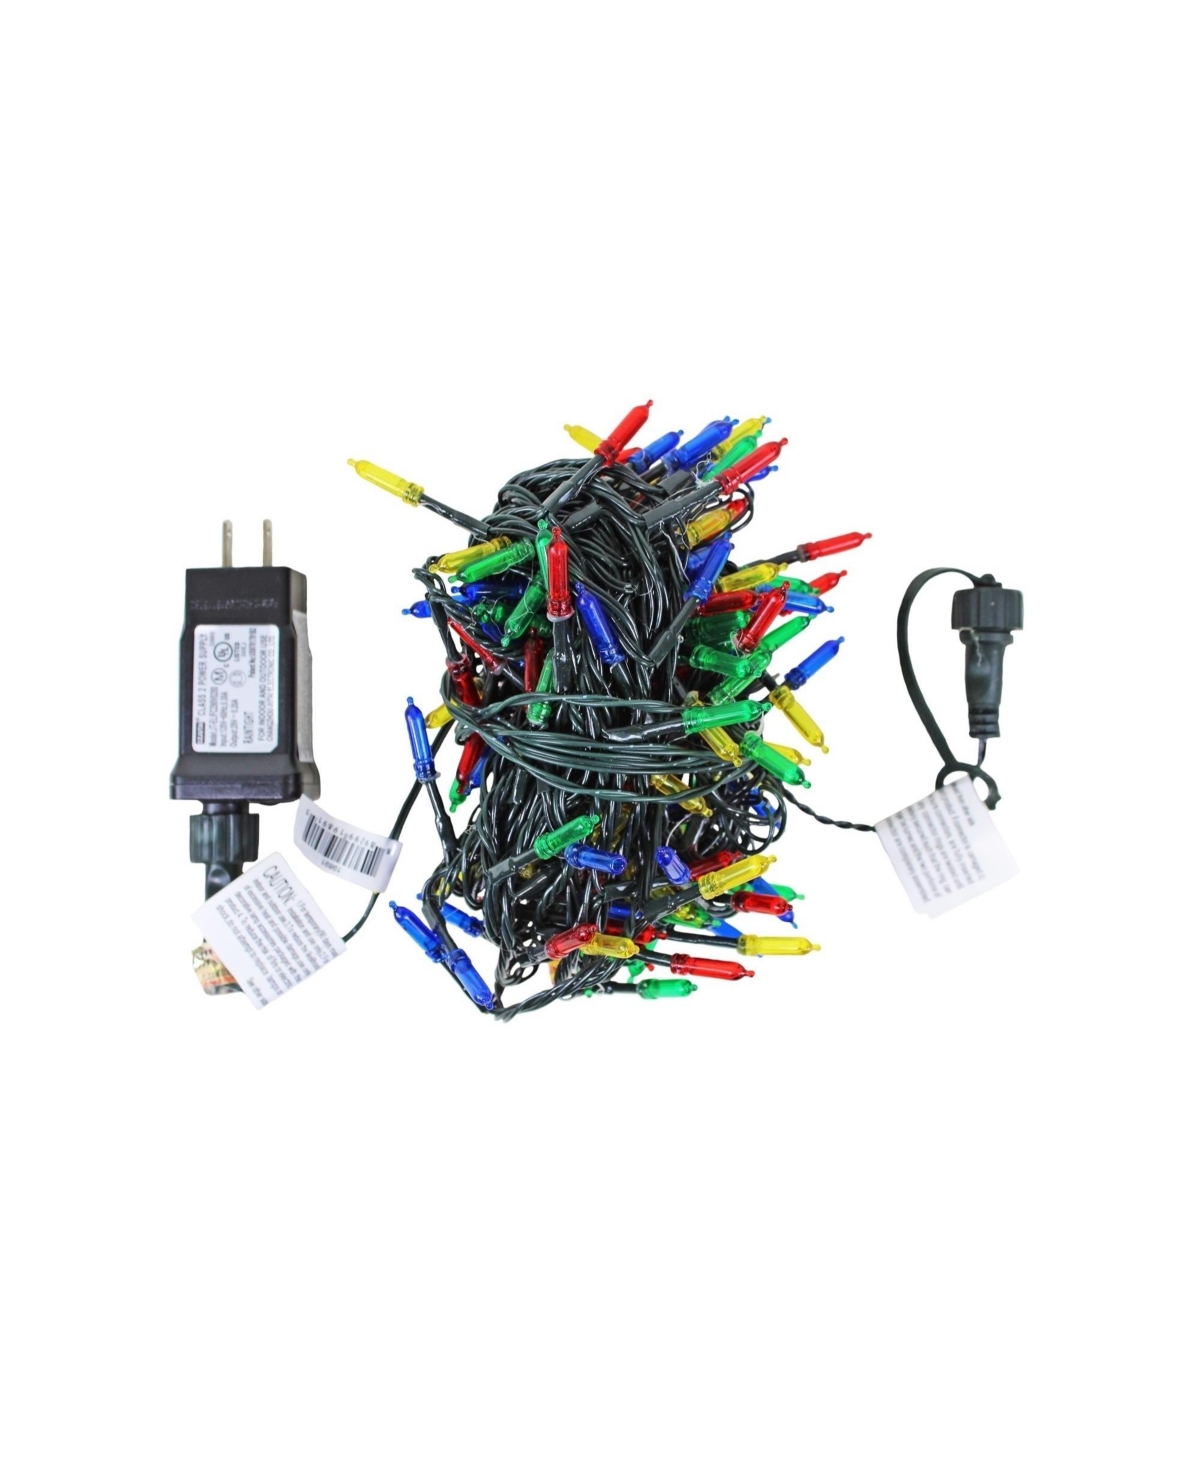 Product Works Productworks Brilliant 8 Function Mini 150 Led Rgb String Lights In Open Misce